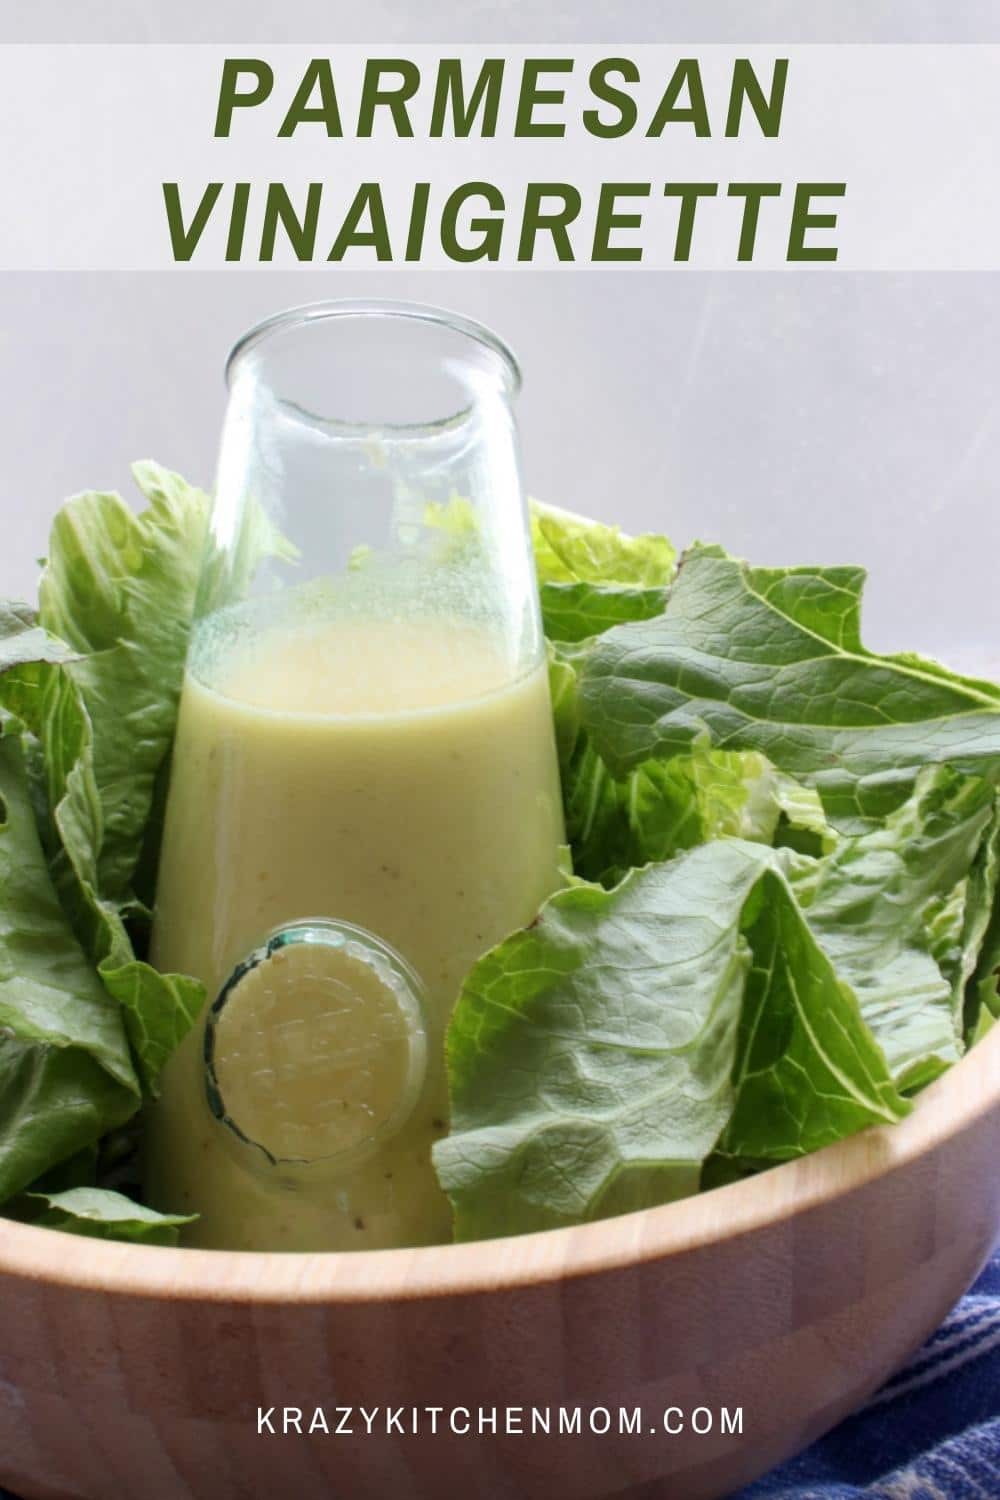 This Parmesan Vinaigrette has become our family's new favorite go-to salad dressings for lettuce salads and pasta salads. via @krazykitchenmom